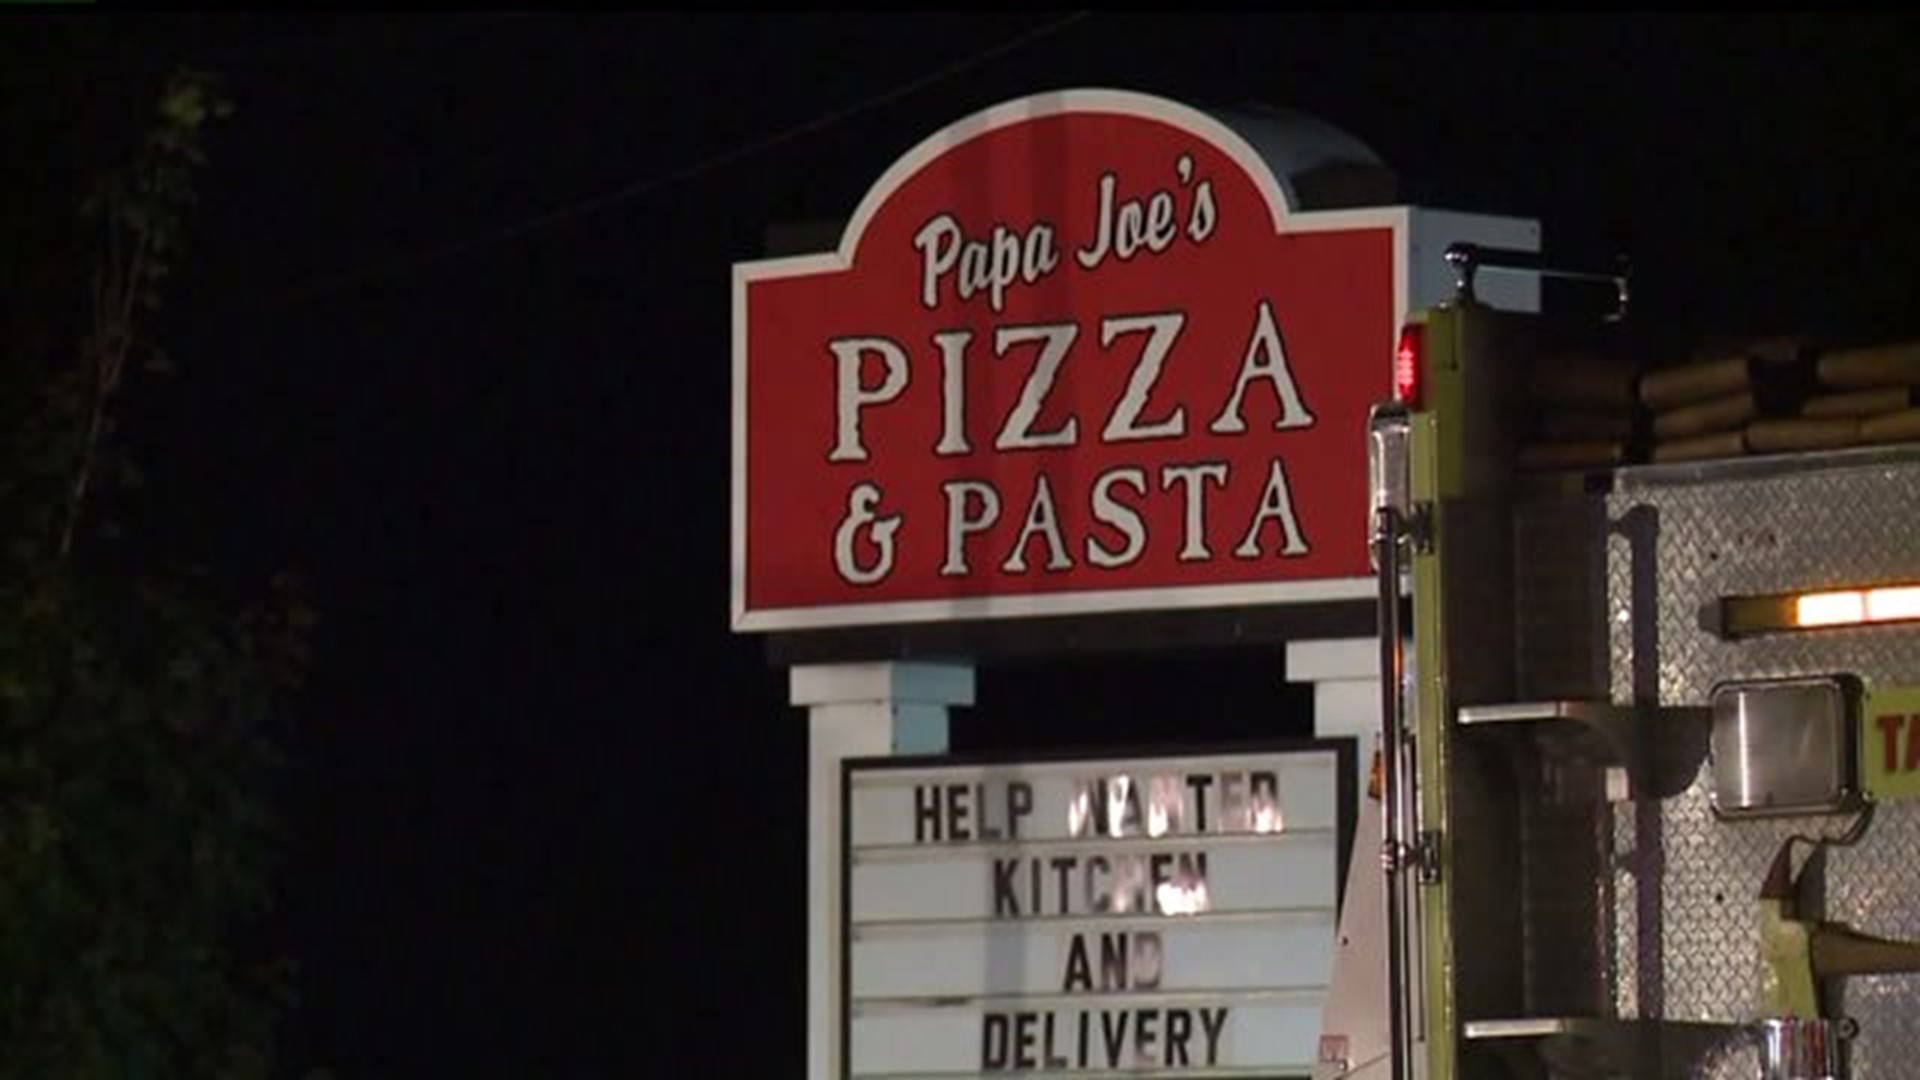 Crews battle overnight fire at pizza joint